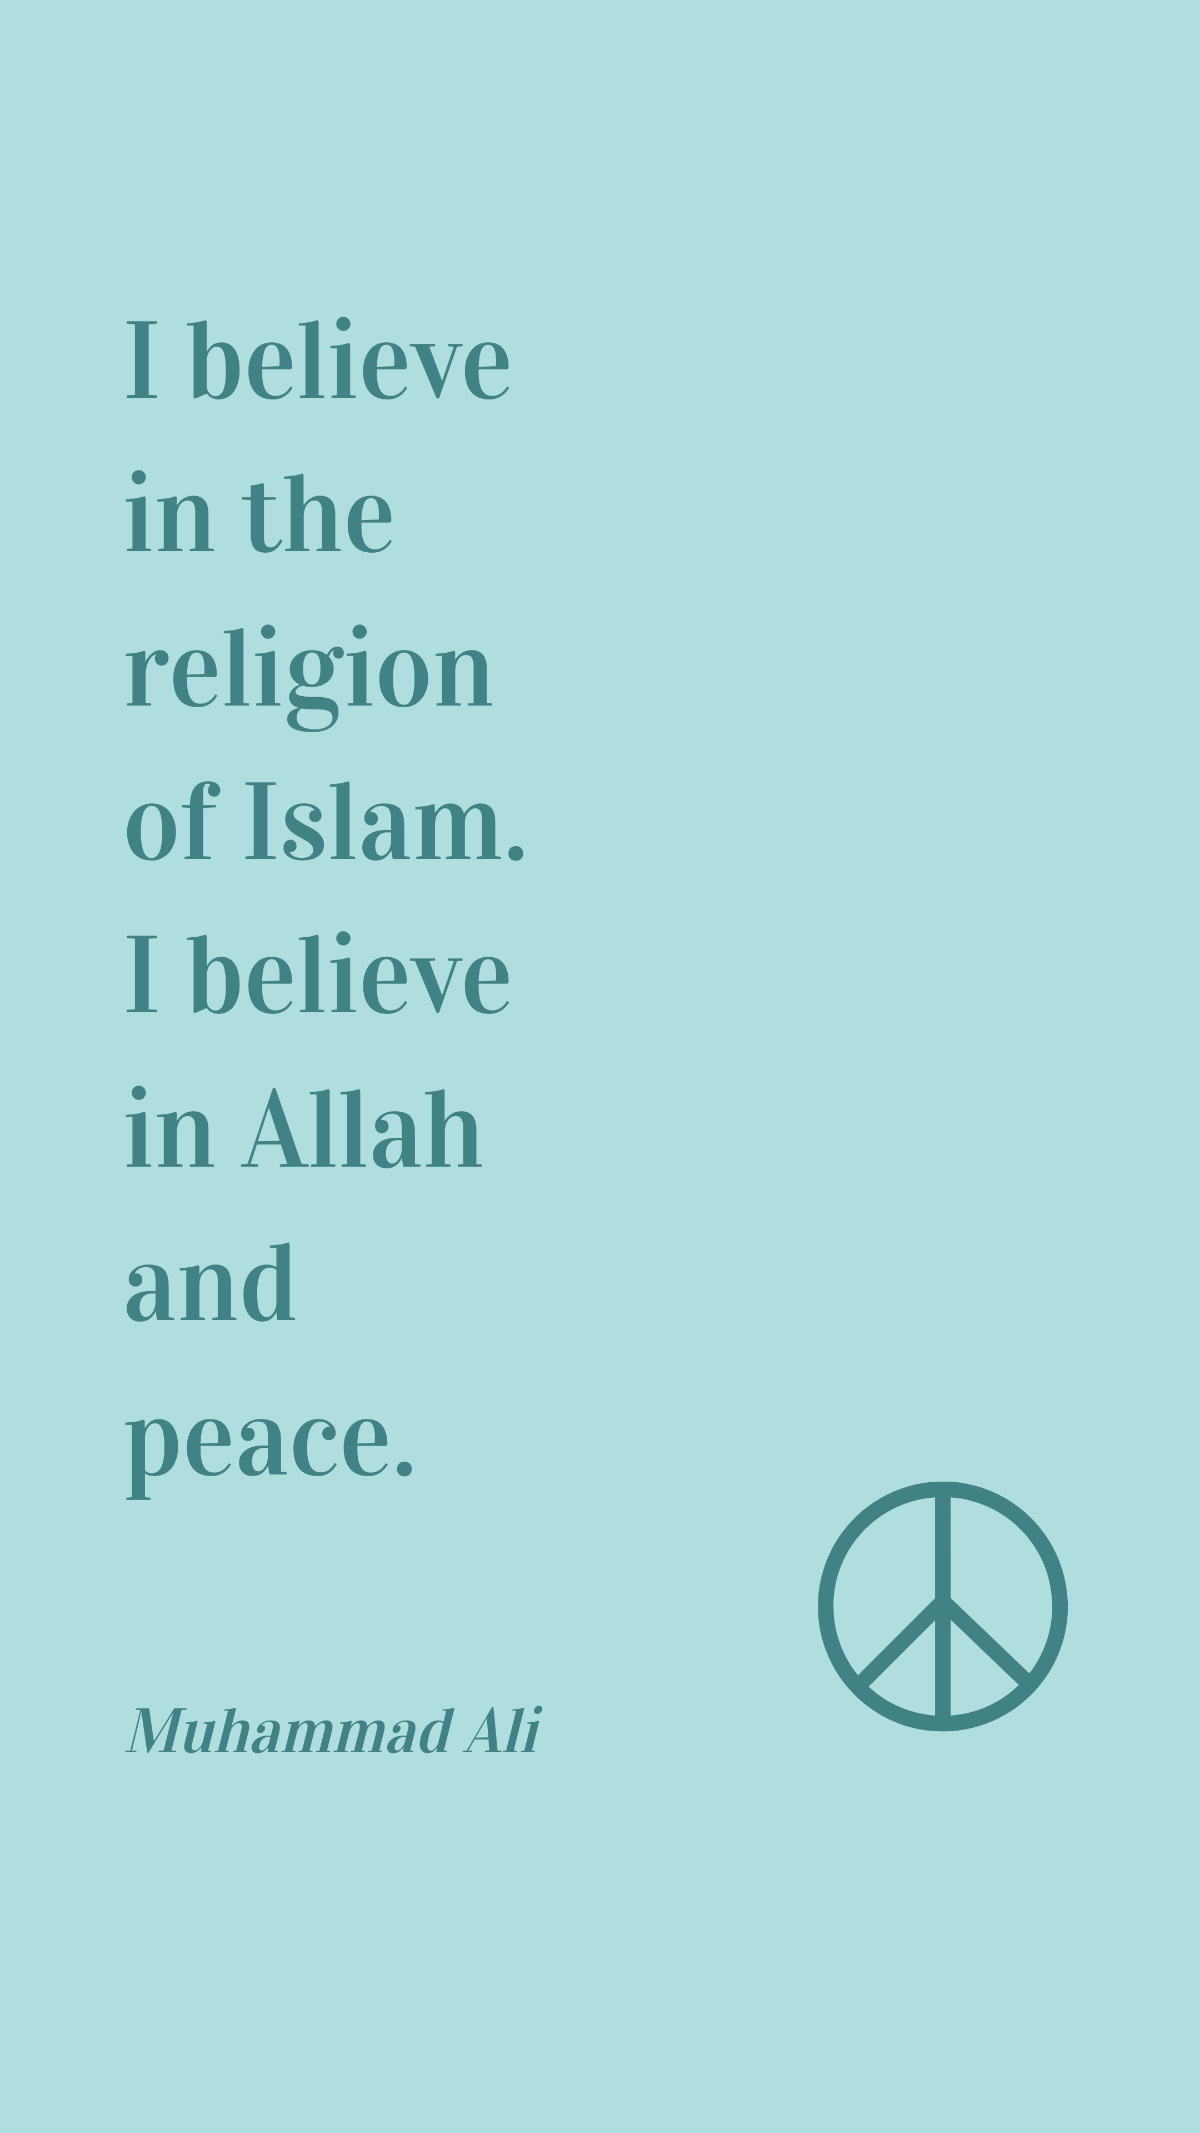 Free Muhammad Ali - I believe in the religion of Islam. I believe in Allah and peace. Template